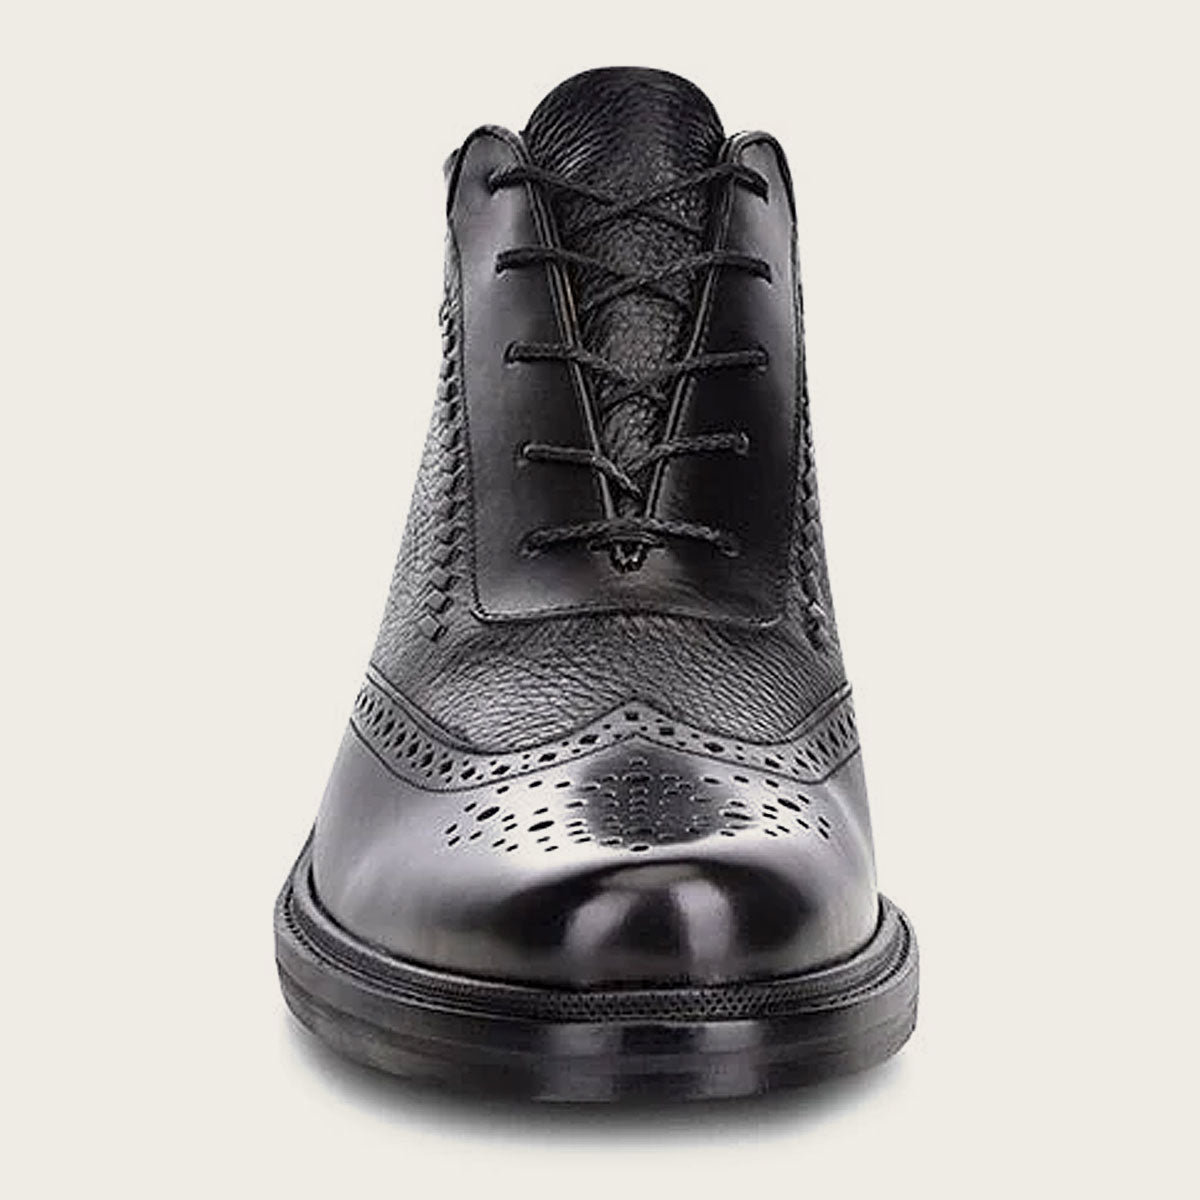 Classic black leather oxford bootie with a sleek and modern design, featuring a lace-up front and a low heel for versatile and comfortable wear